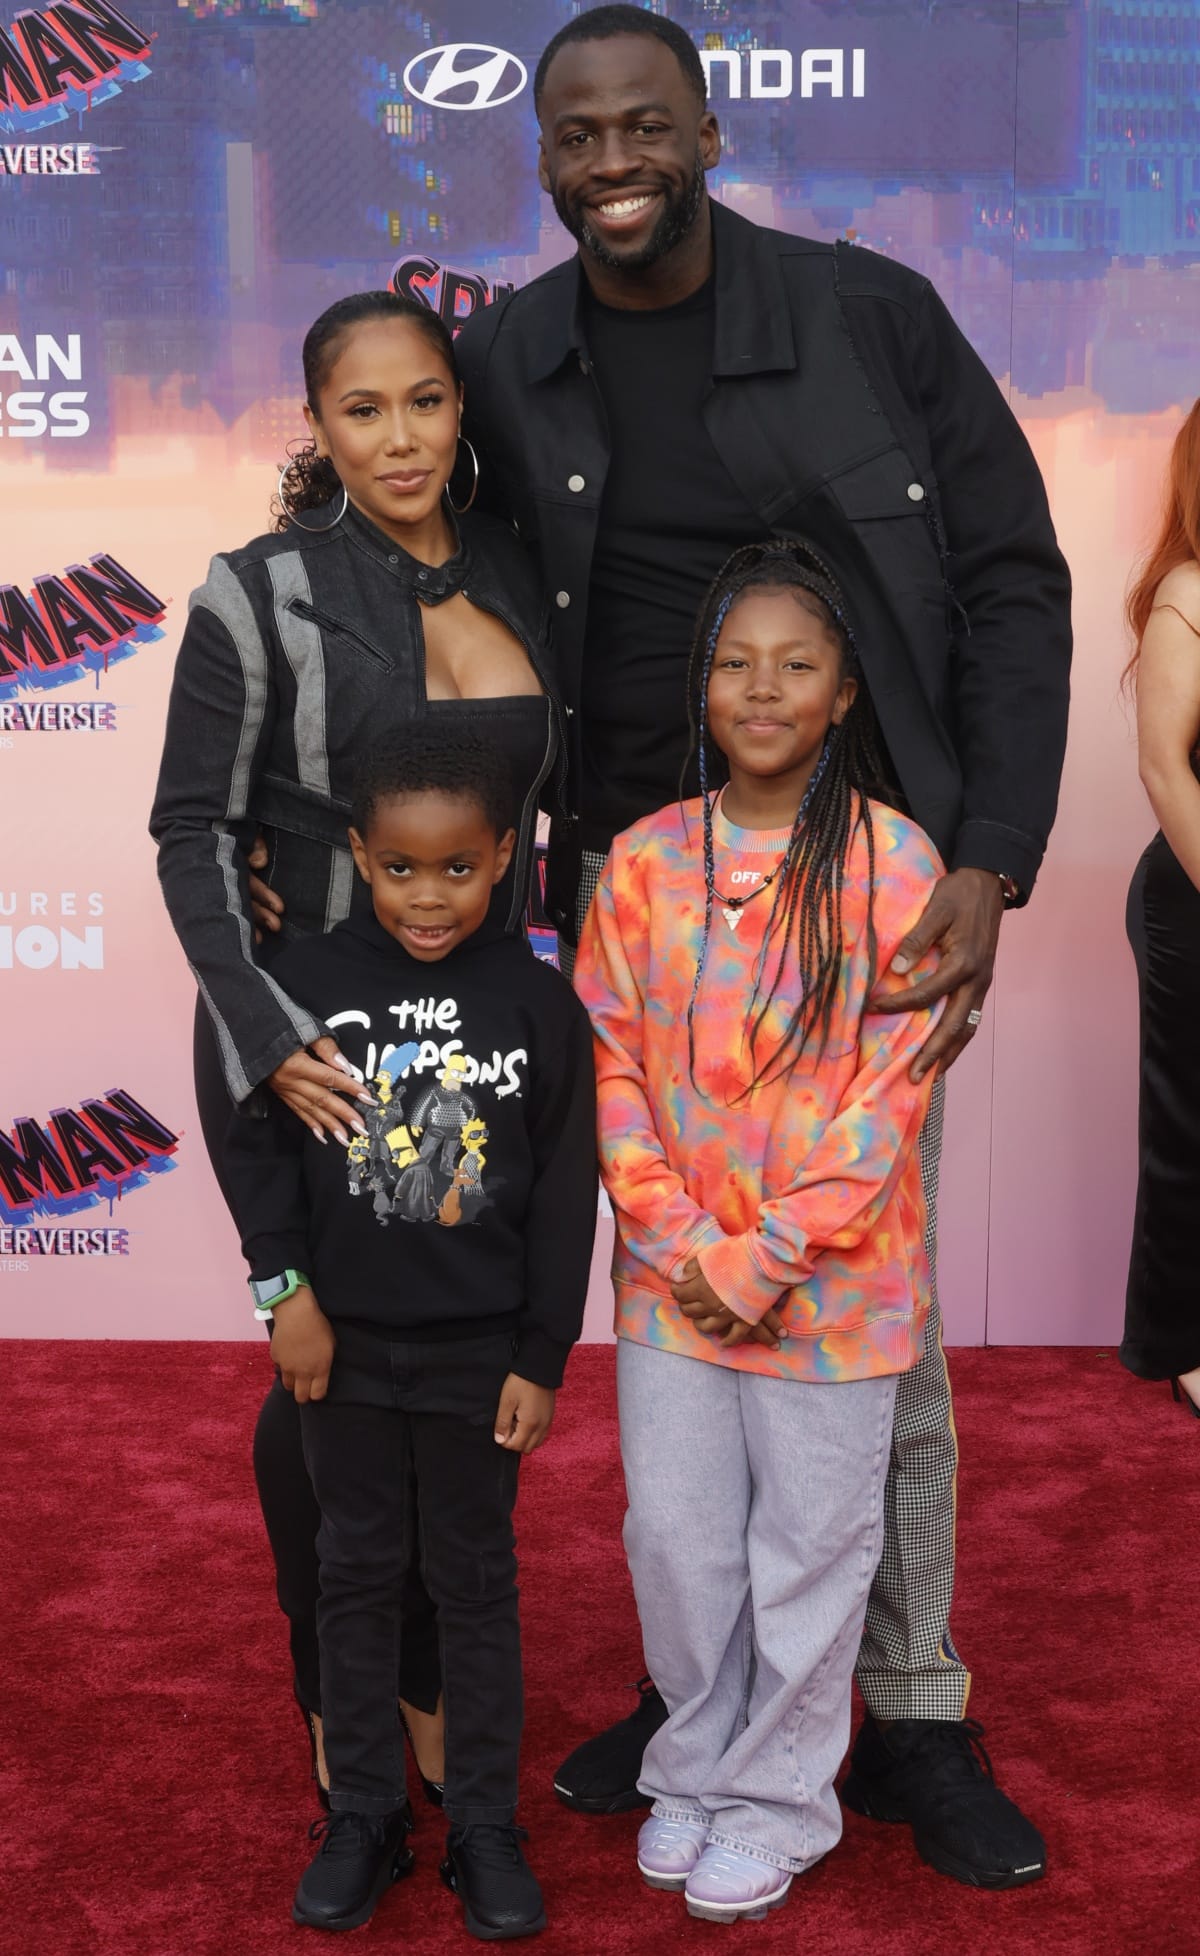 Hazel Renee and Draymond Green with their kids Draymond Jamal “DJ” Green Jr. and Kyla Green at the premiere of Spider-Man: Across the Spider-Verse